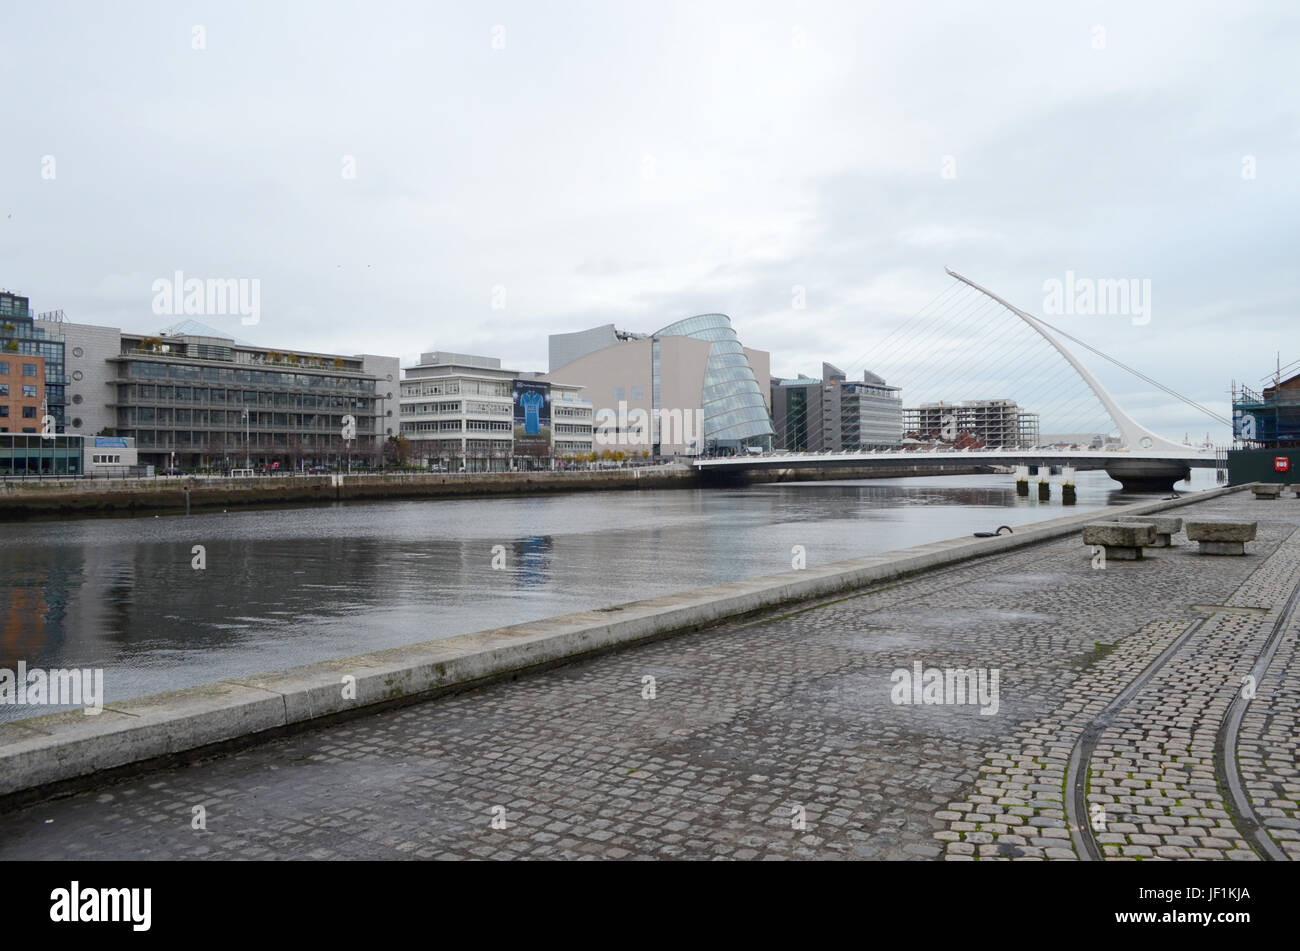 Samuel Beckett Bridge and The Convention Centre by The River Liffey in Dublin, Ireland Stock Photo